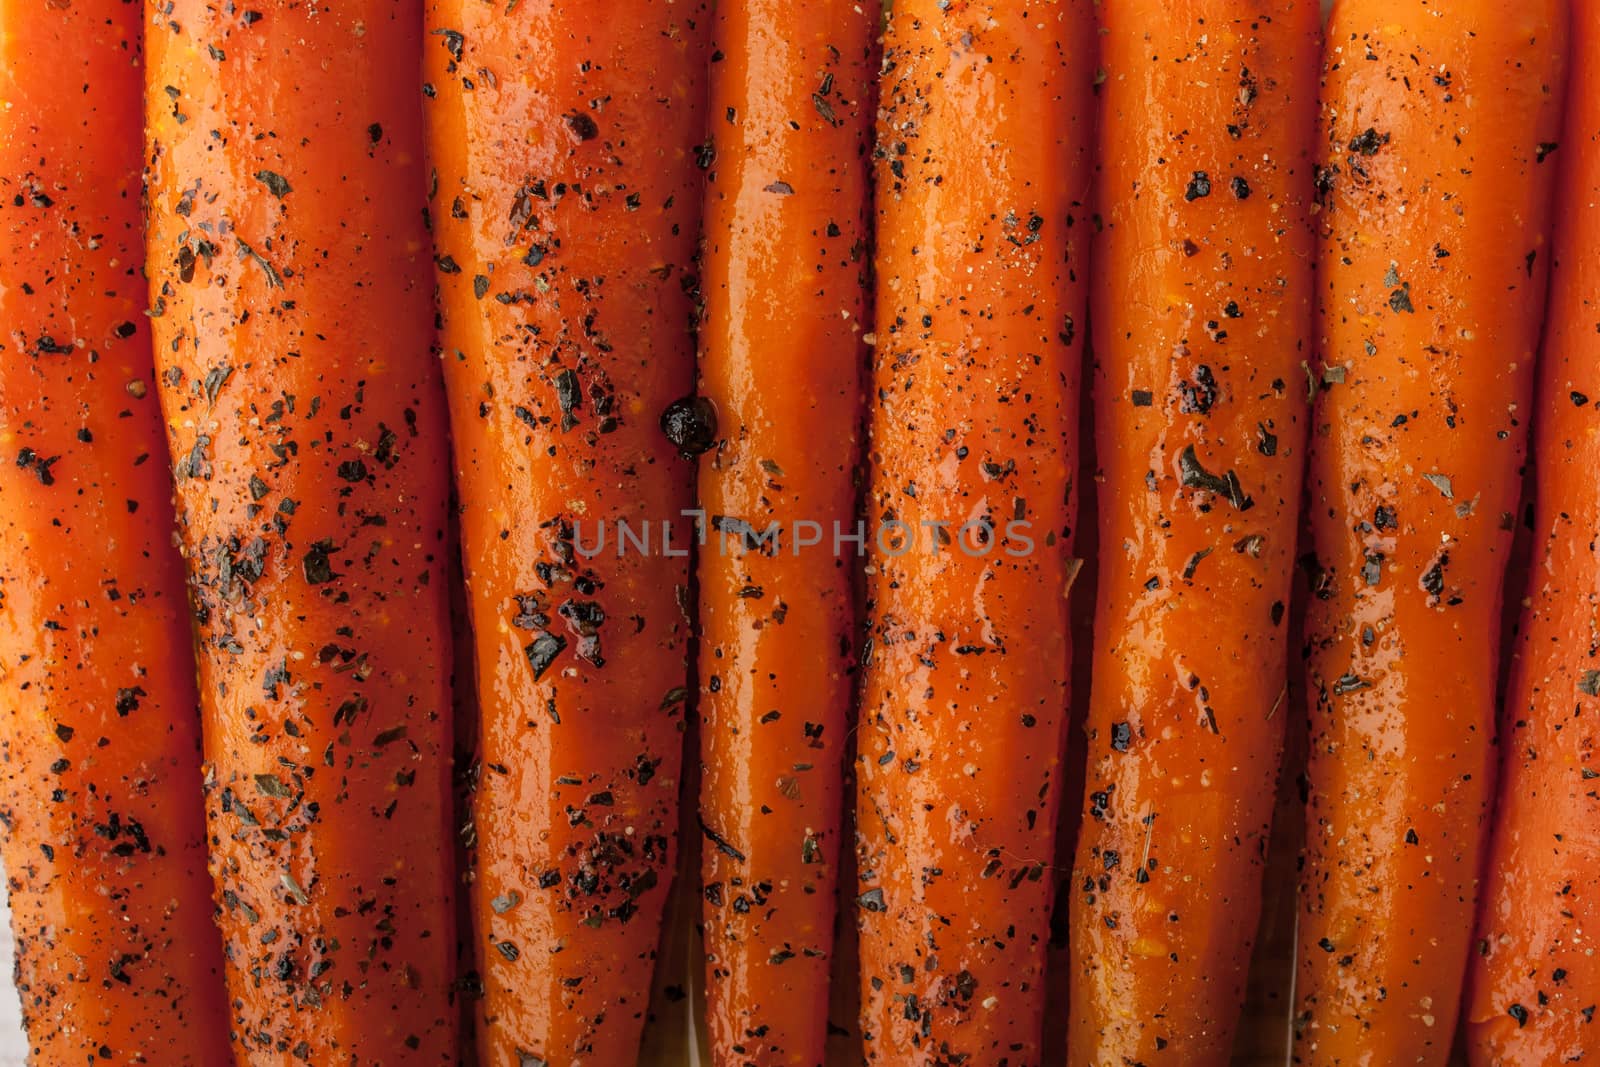 Baked carrots with black pepper and herbs by Deniskarpenkov